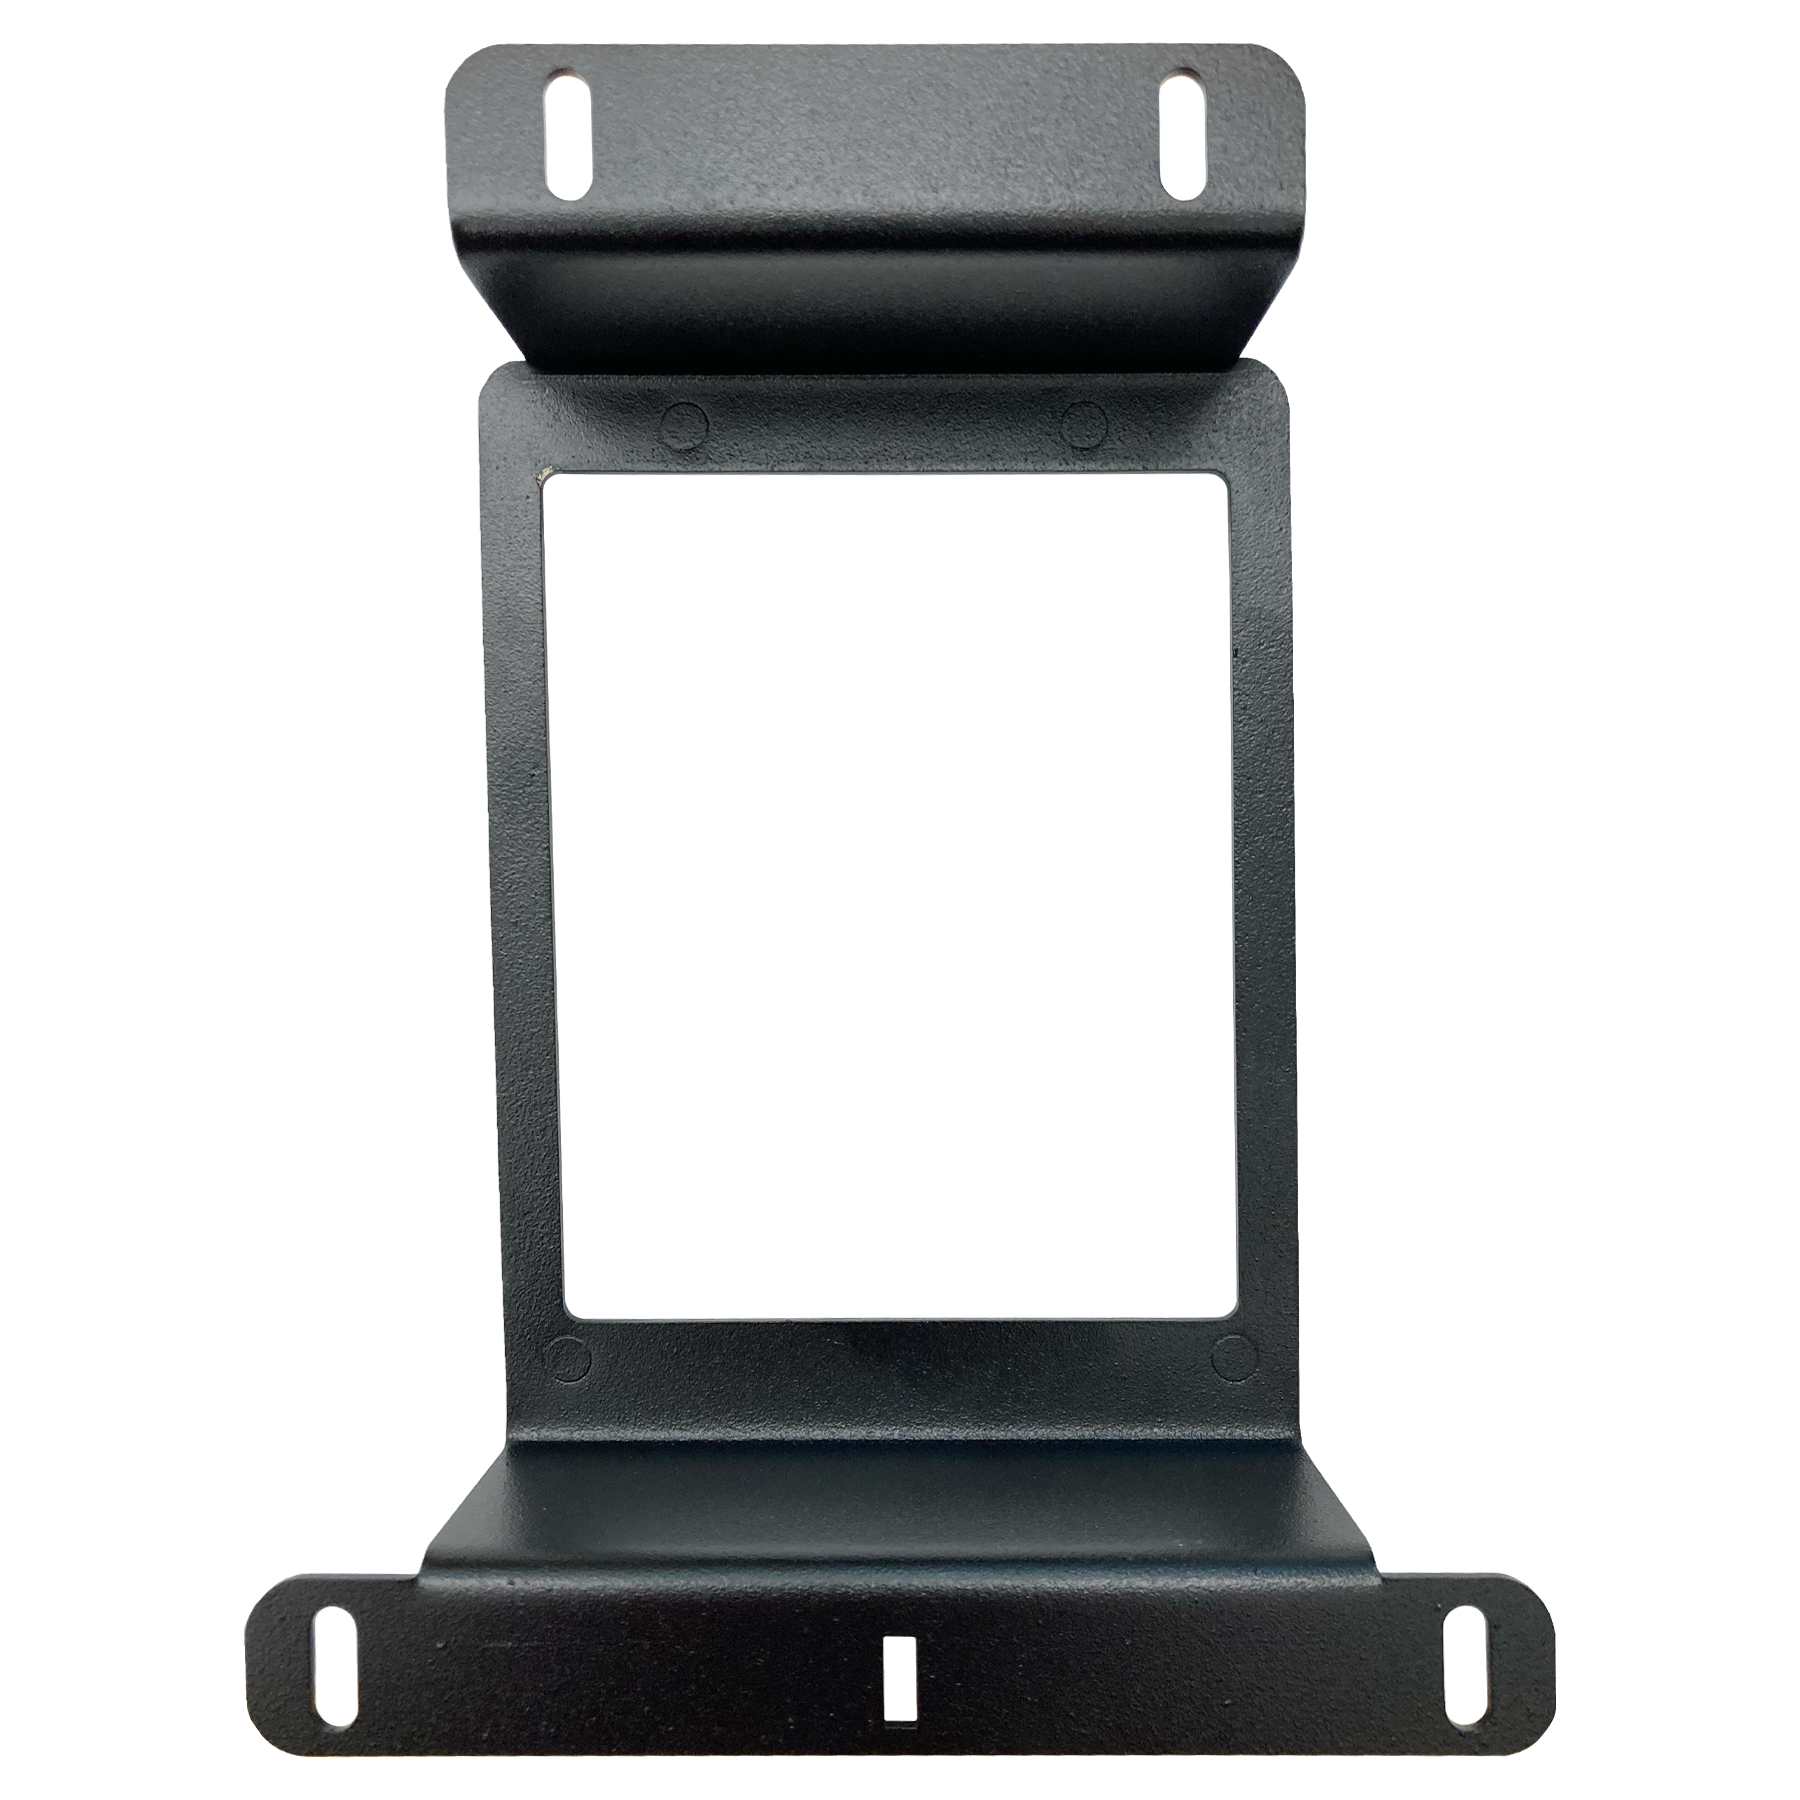 Sold by Miele Manufacturing (Miele MFG). Bill Acceptor Brackets for ICT or CPI Bill Acceptors. Pennsylvania Skill (PA Skill) is powered by Pace-O-Matic (POM) and built by Miele Manufacturing (Miele MFG).